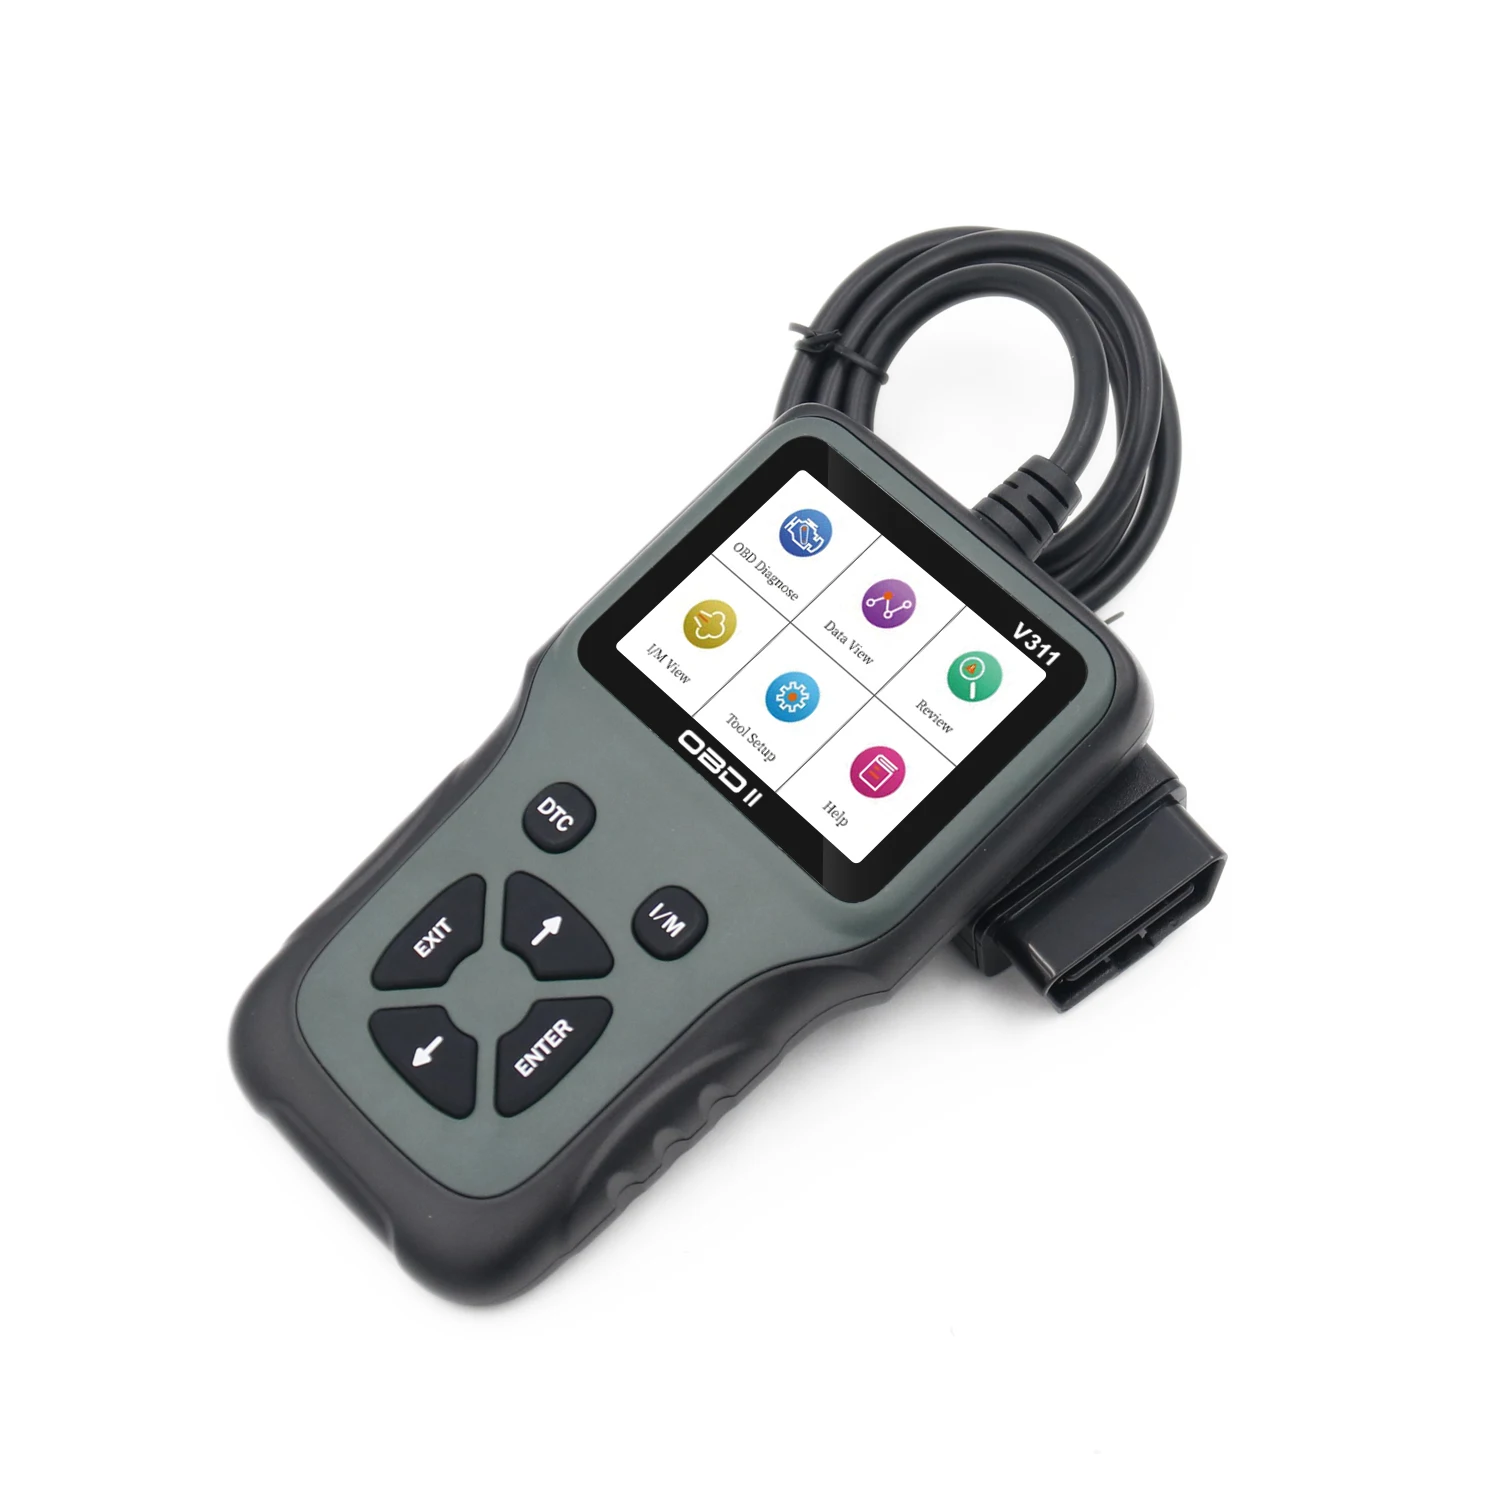 New Obdii Read Code Read Freeze Frame Data Vehicle Information For